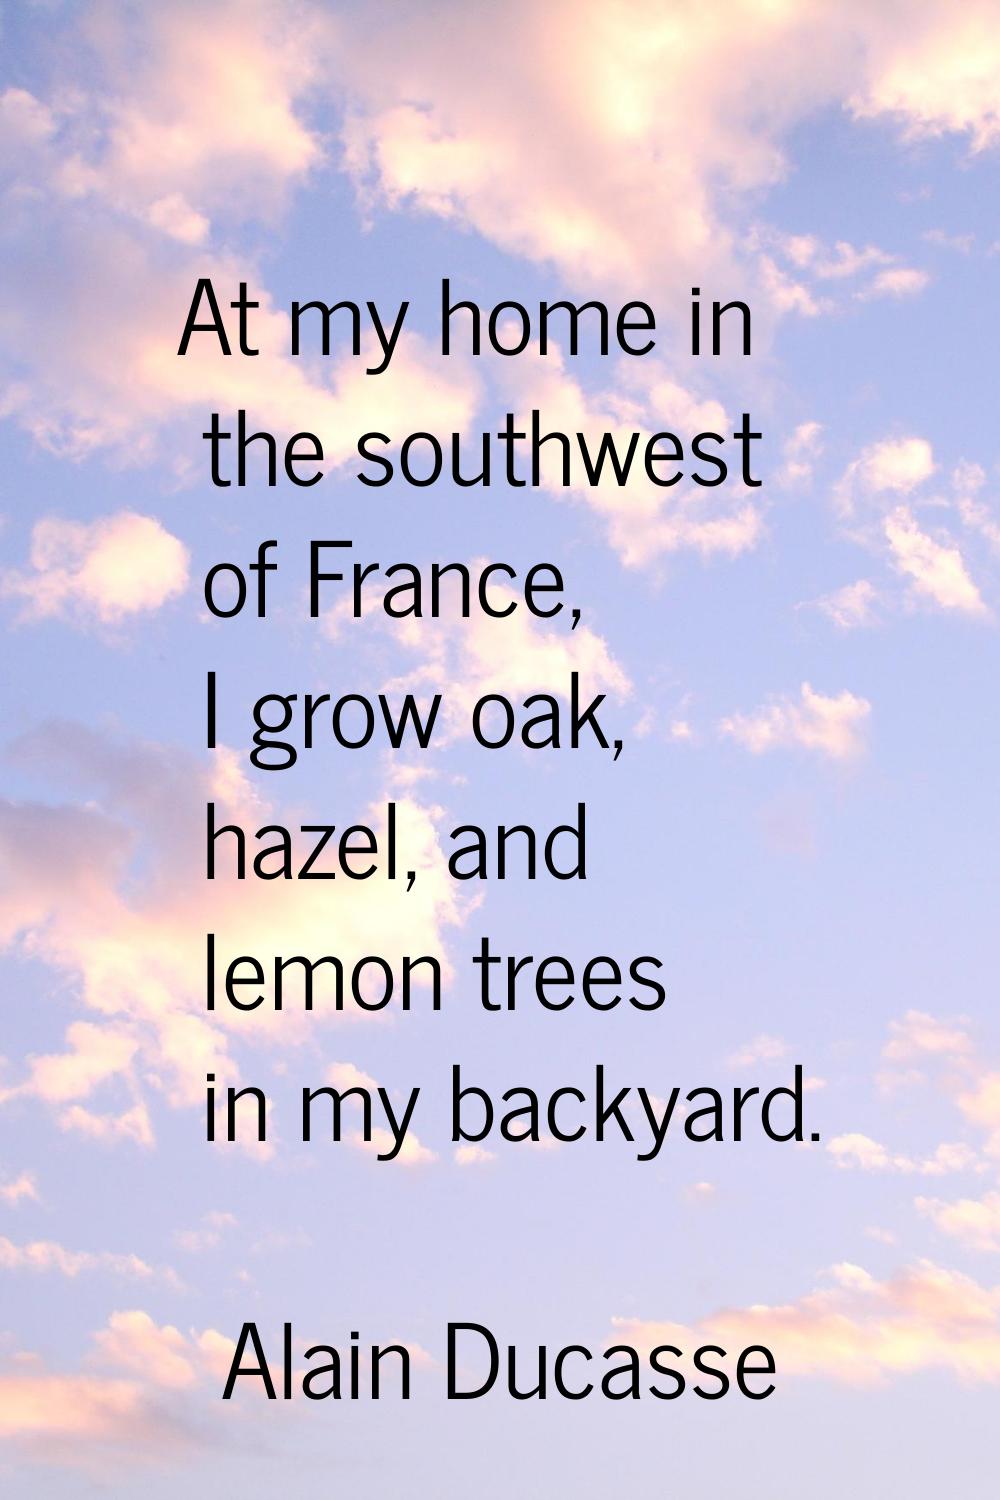 At my home in the southwest of France, I grow oak, hazel, and lemon trees in my backyard.